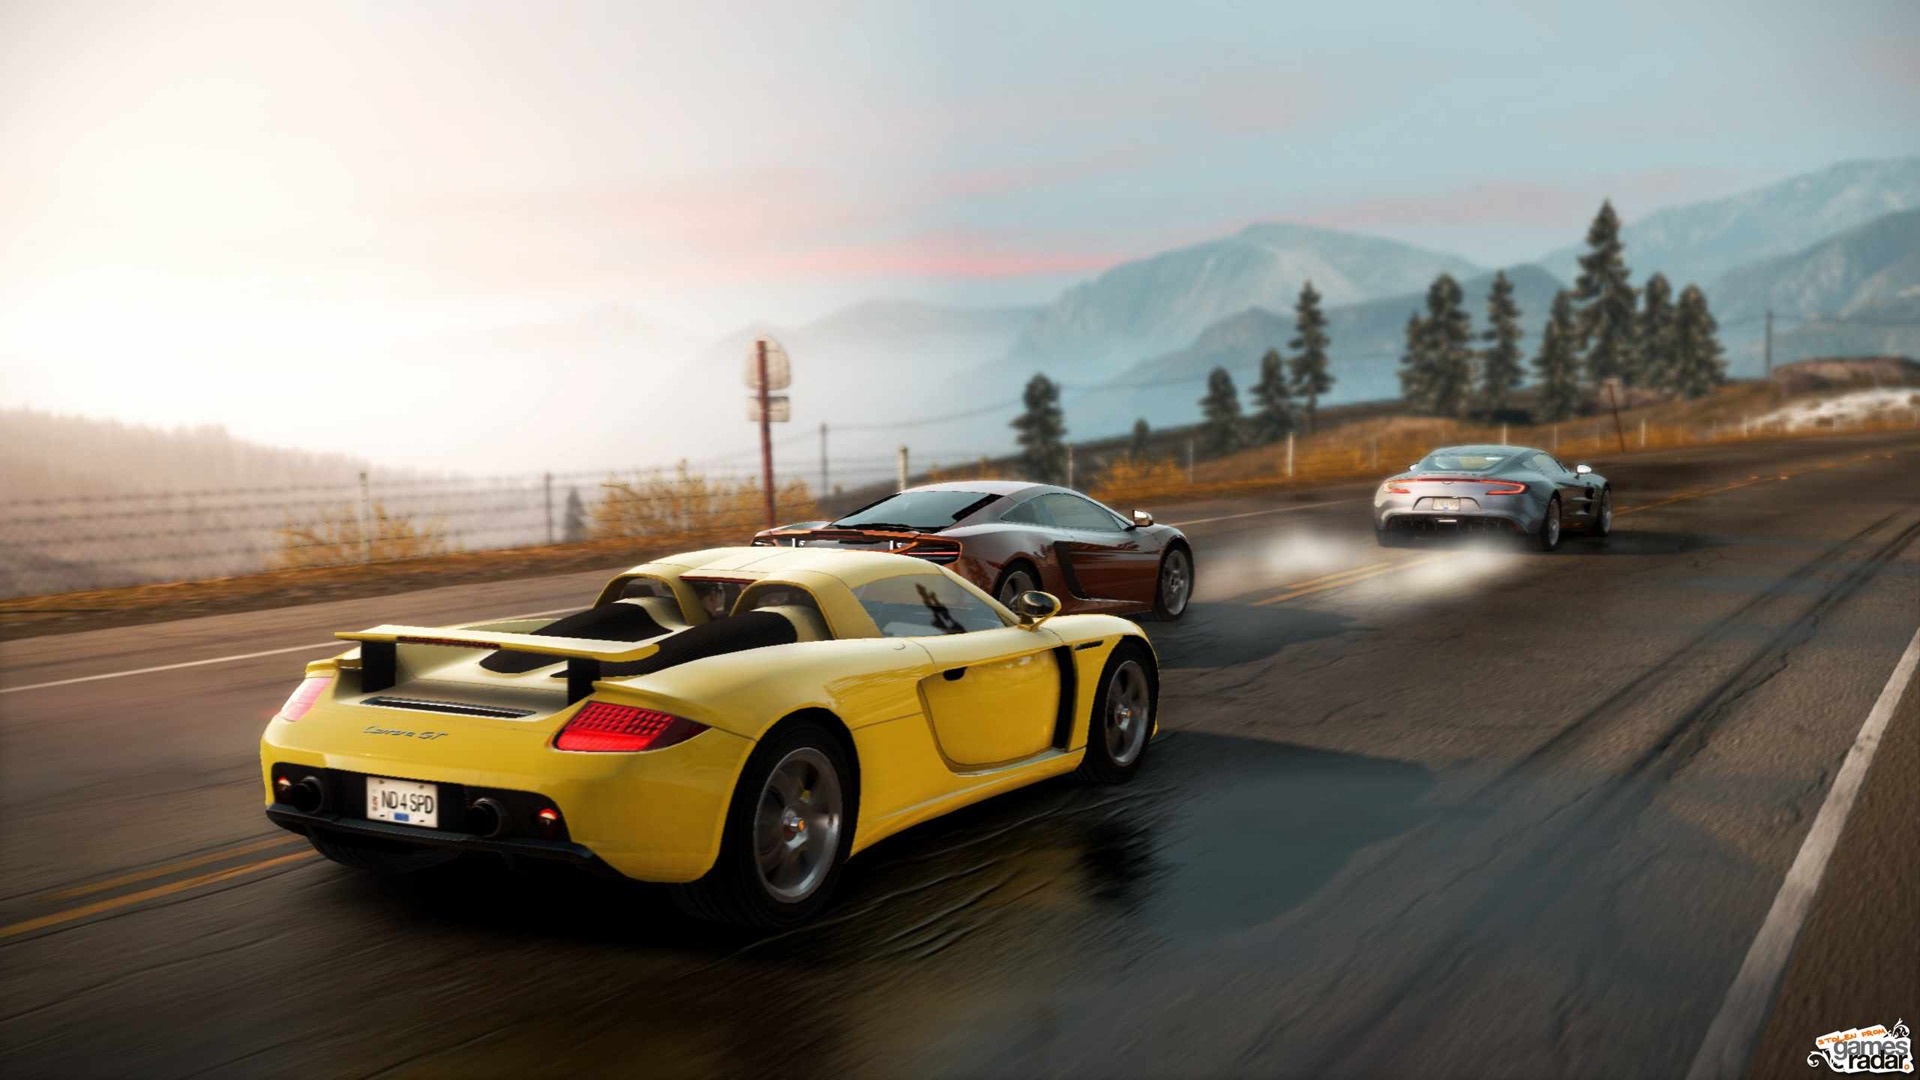 Need for Speed: Hot Pursuit 極品飛車14：熱力追踪 #6 - 1920x1080